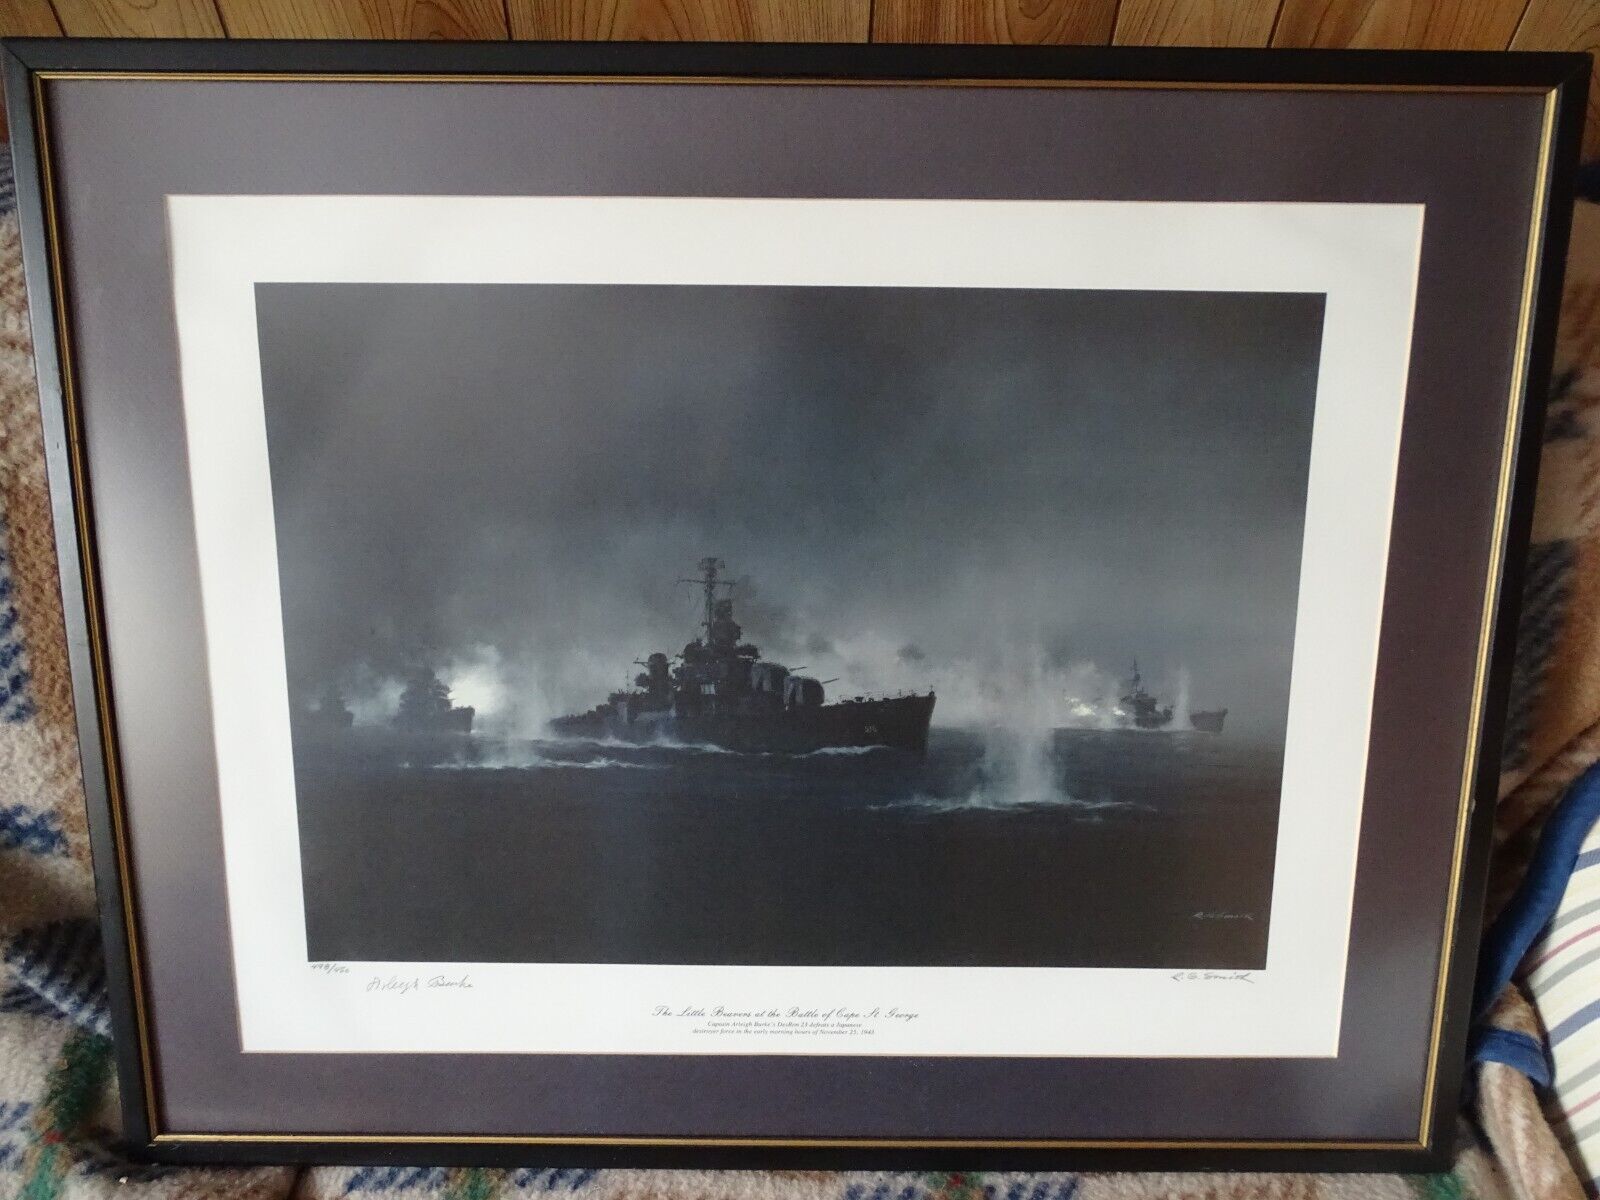 WW2 NAVAL DESTROYER SEA BATTLE THE LITTLE BEAVERS ADMIRAL SIGNED R.G. SMITH RARE